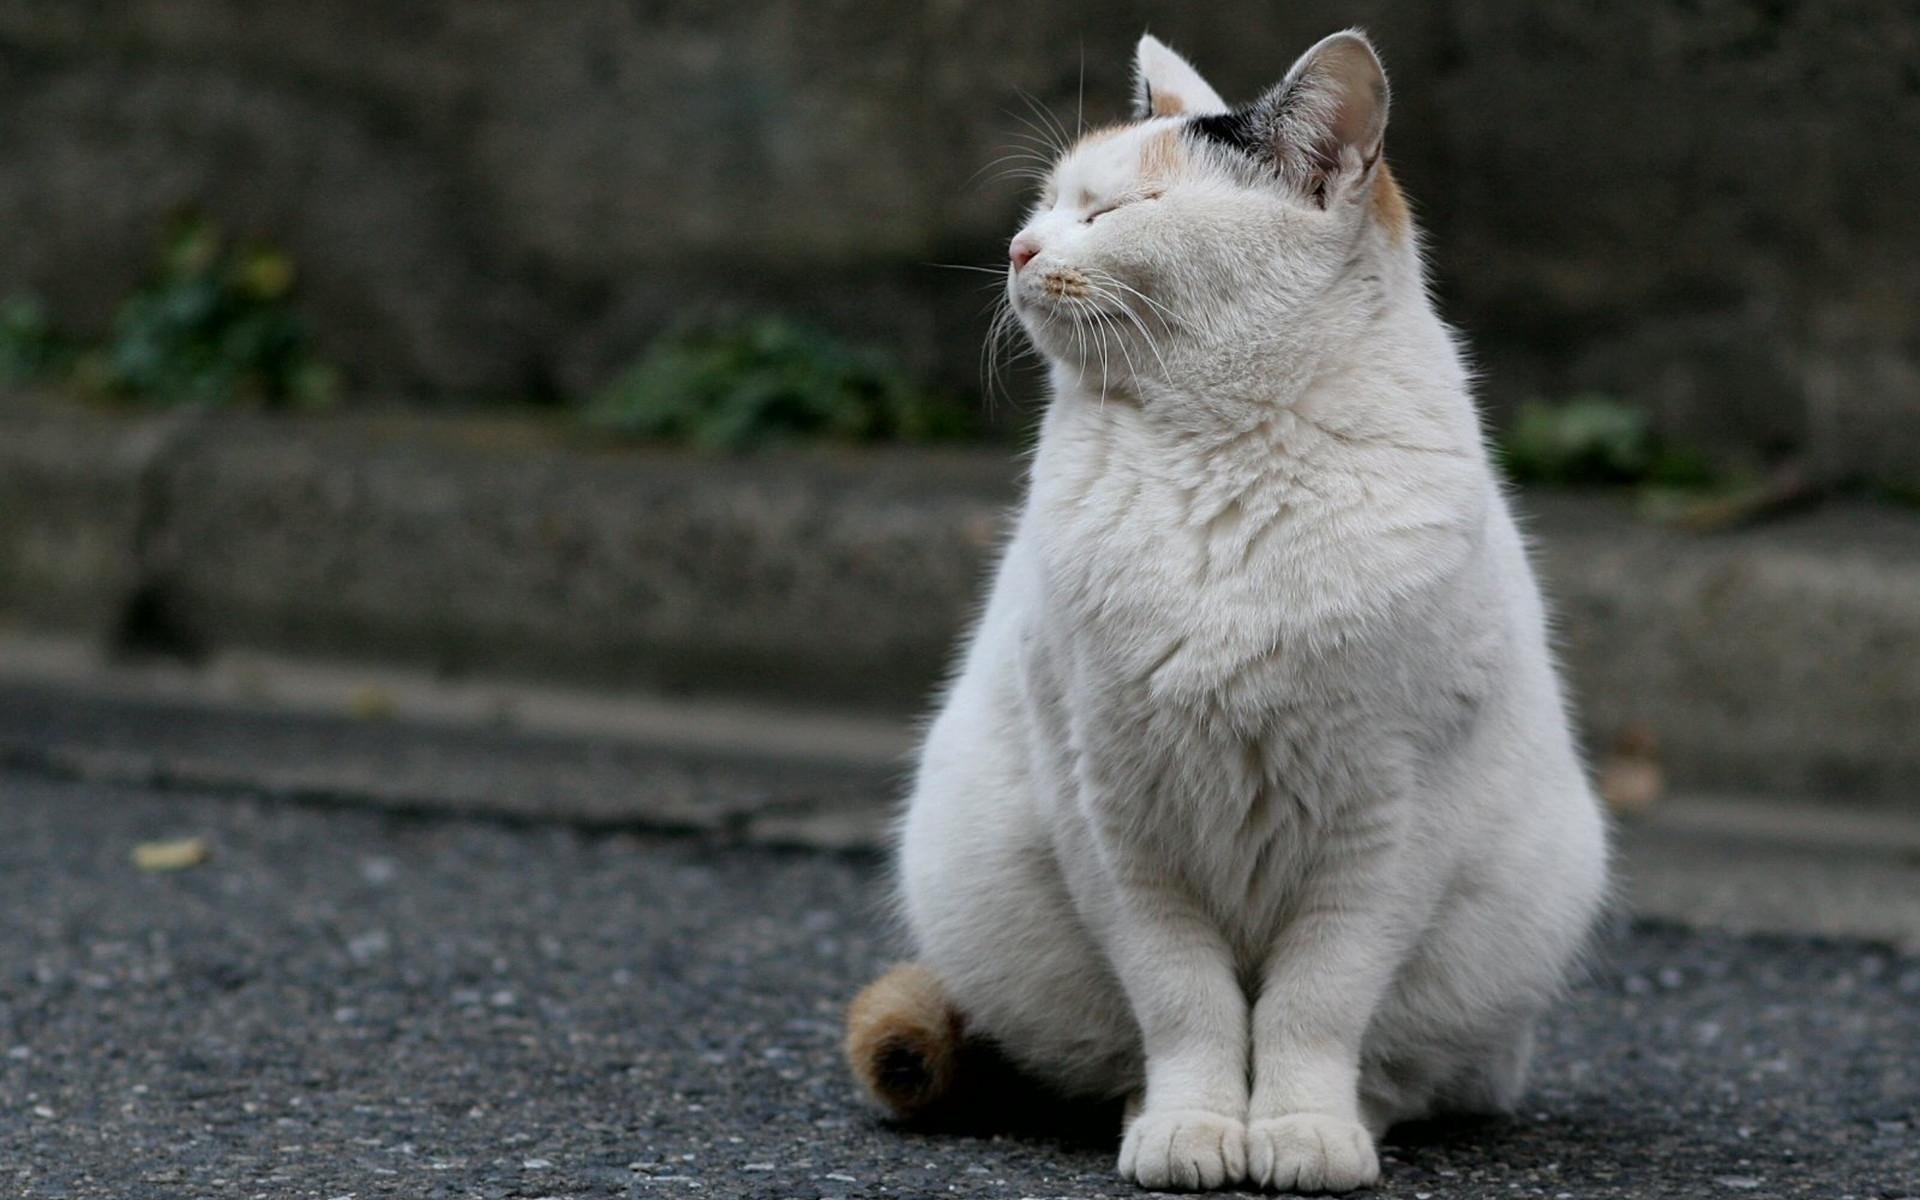 HD desktop wallpaper of a white cat sitting on a street, glancing upward with a curious expression.